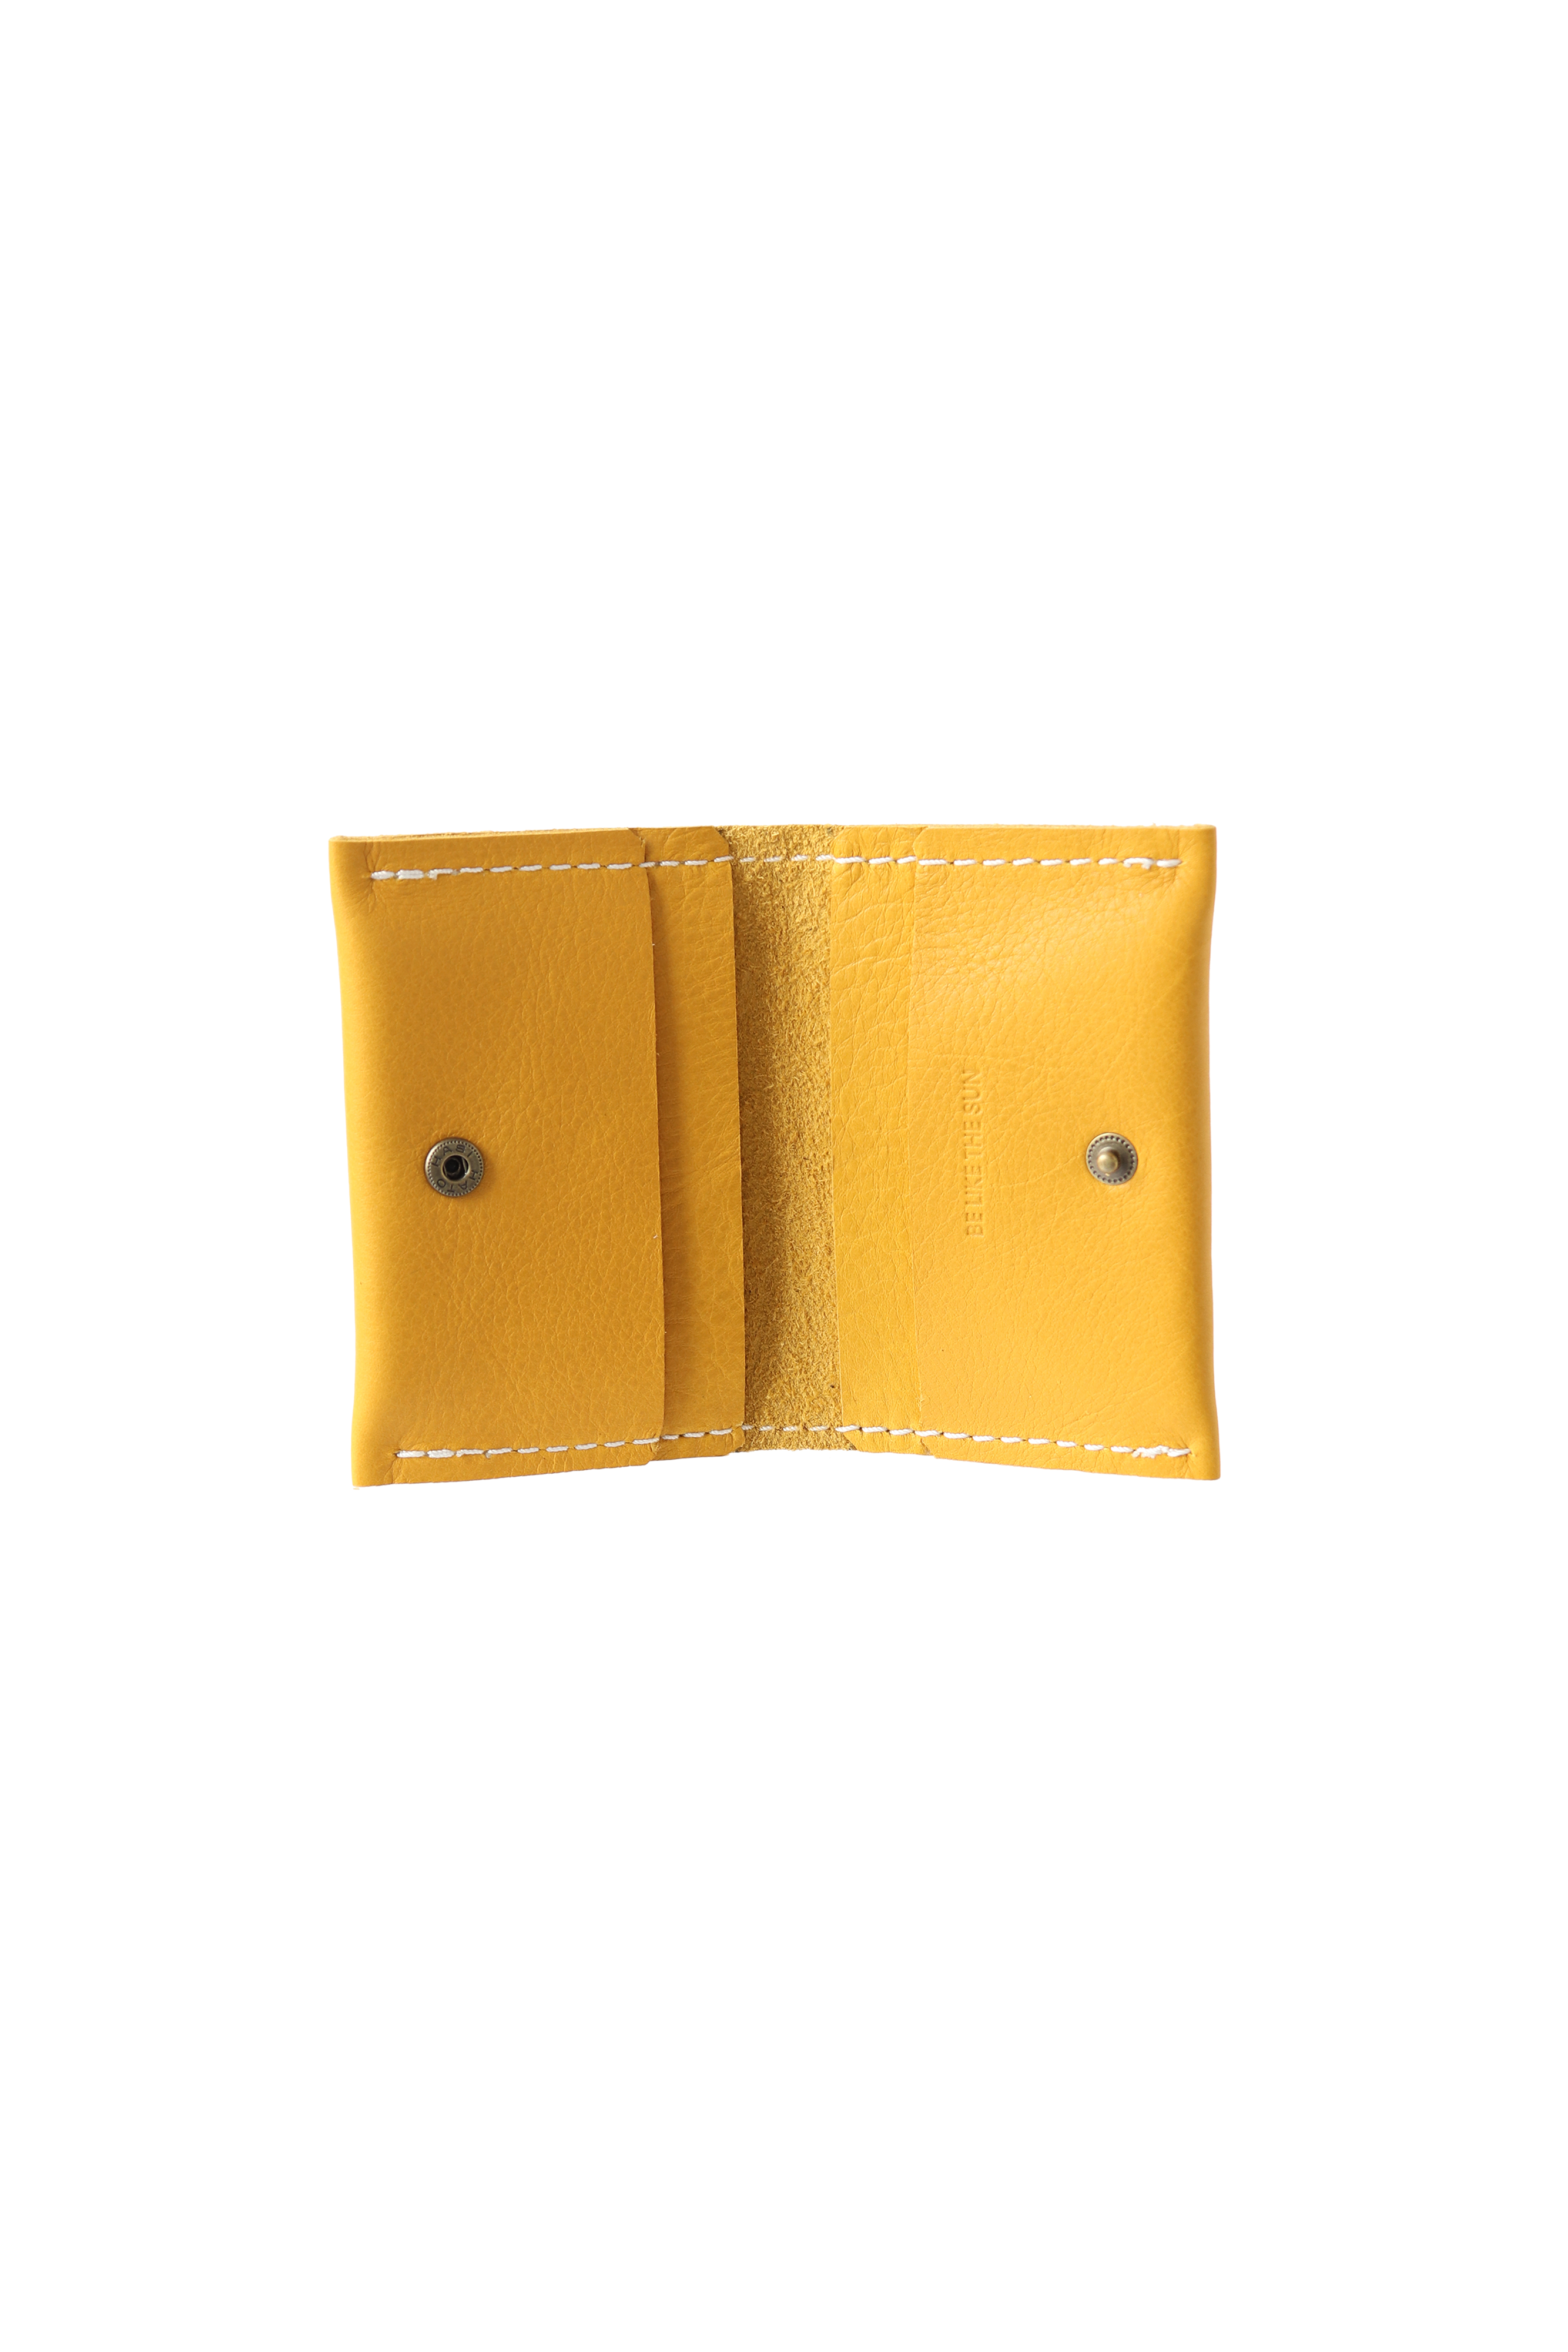 Small Fortune Leather Wallet in Sun Yellow